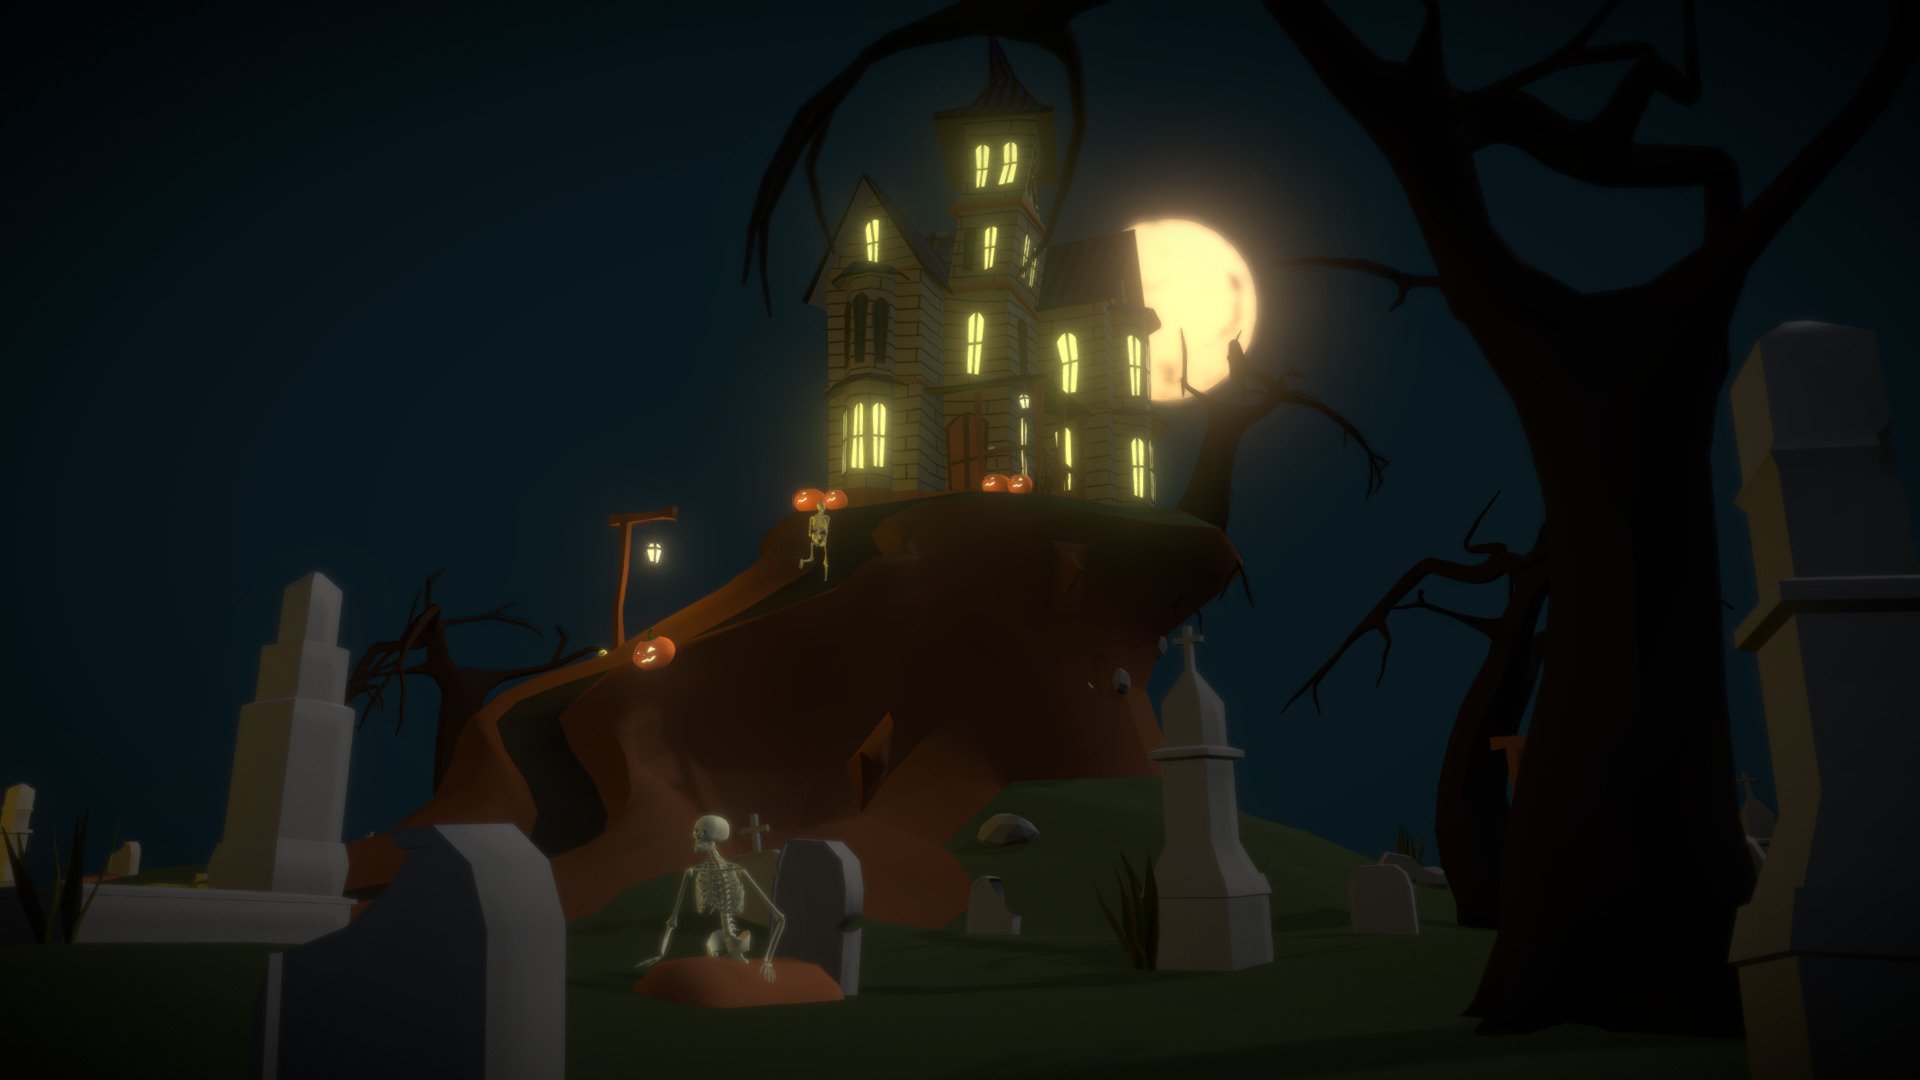 A simple low poly Halloween haunted house, for the #HauntedHouseChallenge.

Spent too much time modelling and rigging the skeleton and run out of time for some features i had in mind.
All made in Blender 2.90

Edit: I finally completed after a month of working on my spare time. 
I changed the house for a more cartoony style. Been playing with the shader node editor to give the house more personality with procedural textures.
Also added more action to the scene 3d model